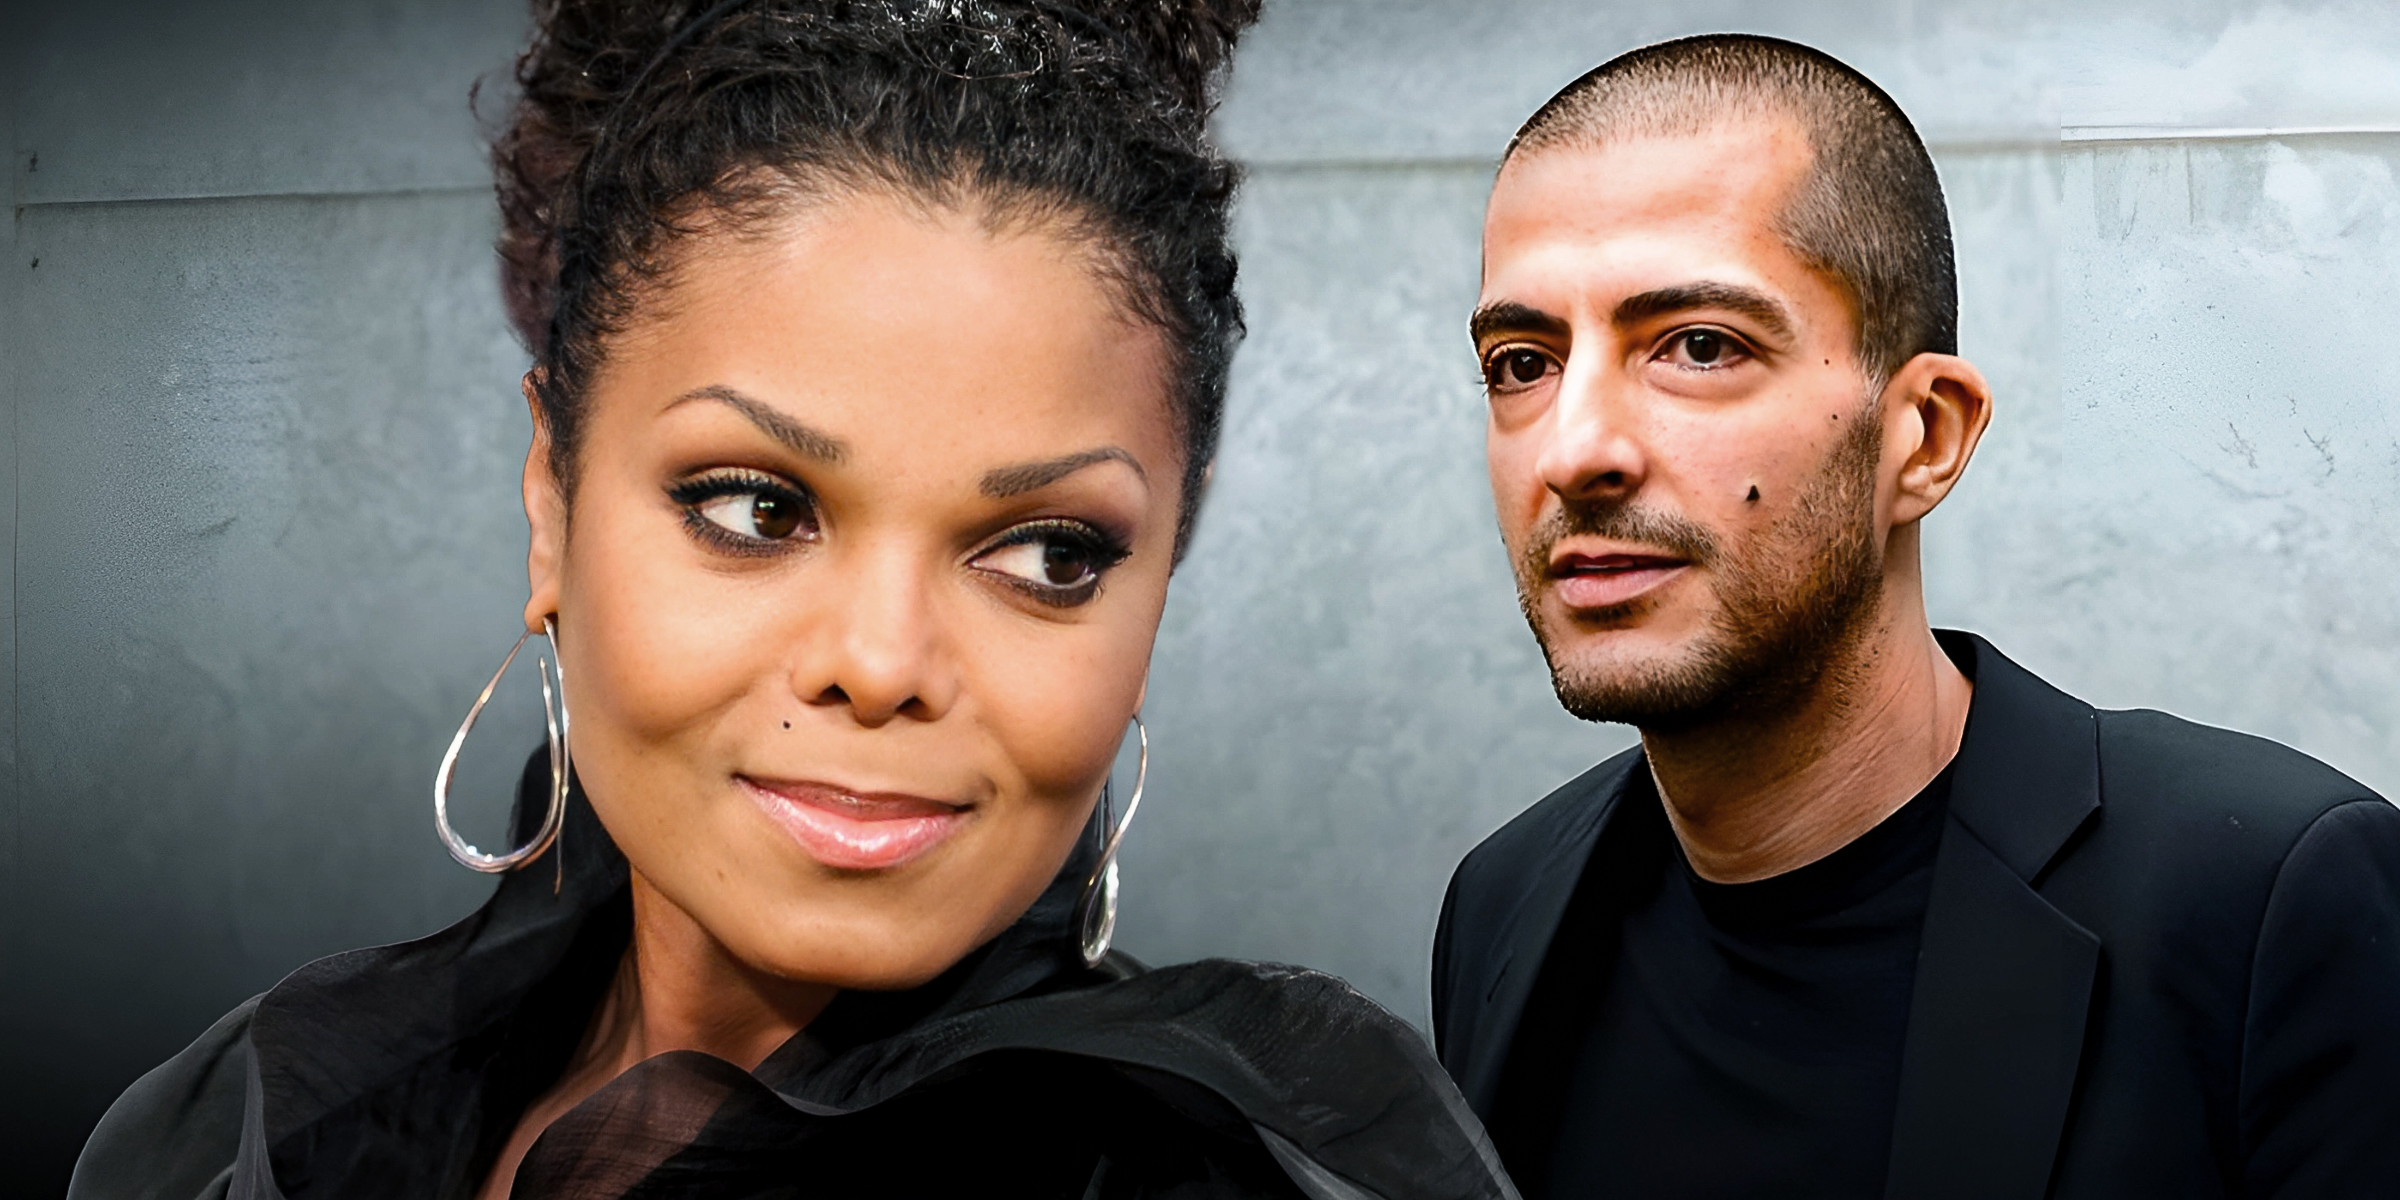 Janet Jackson and Wissam Al Mana | Source: Getty Images